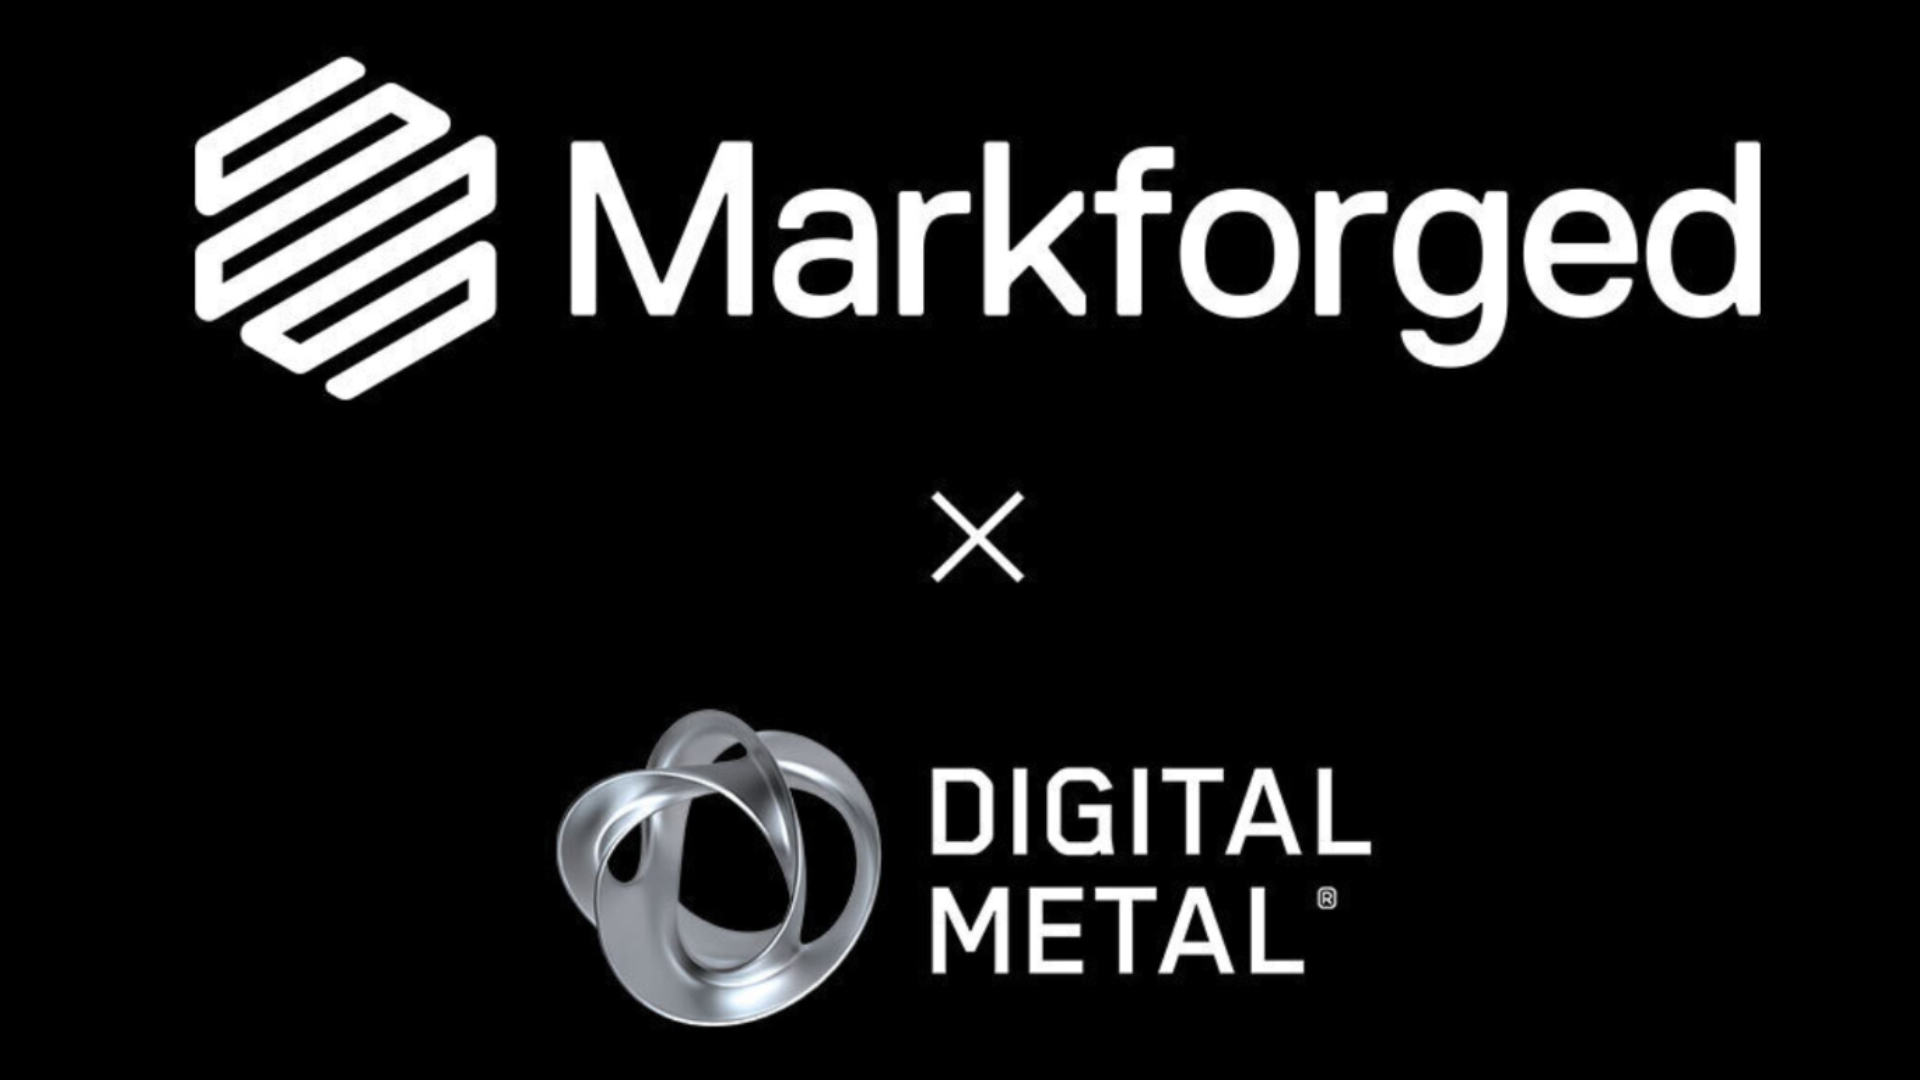 Markforged announced agreement with Höganäs AB to acquire Digital Metal extending capabilities into high-throughput production of metal additive parts.